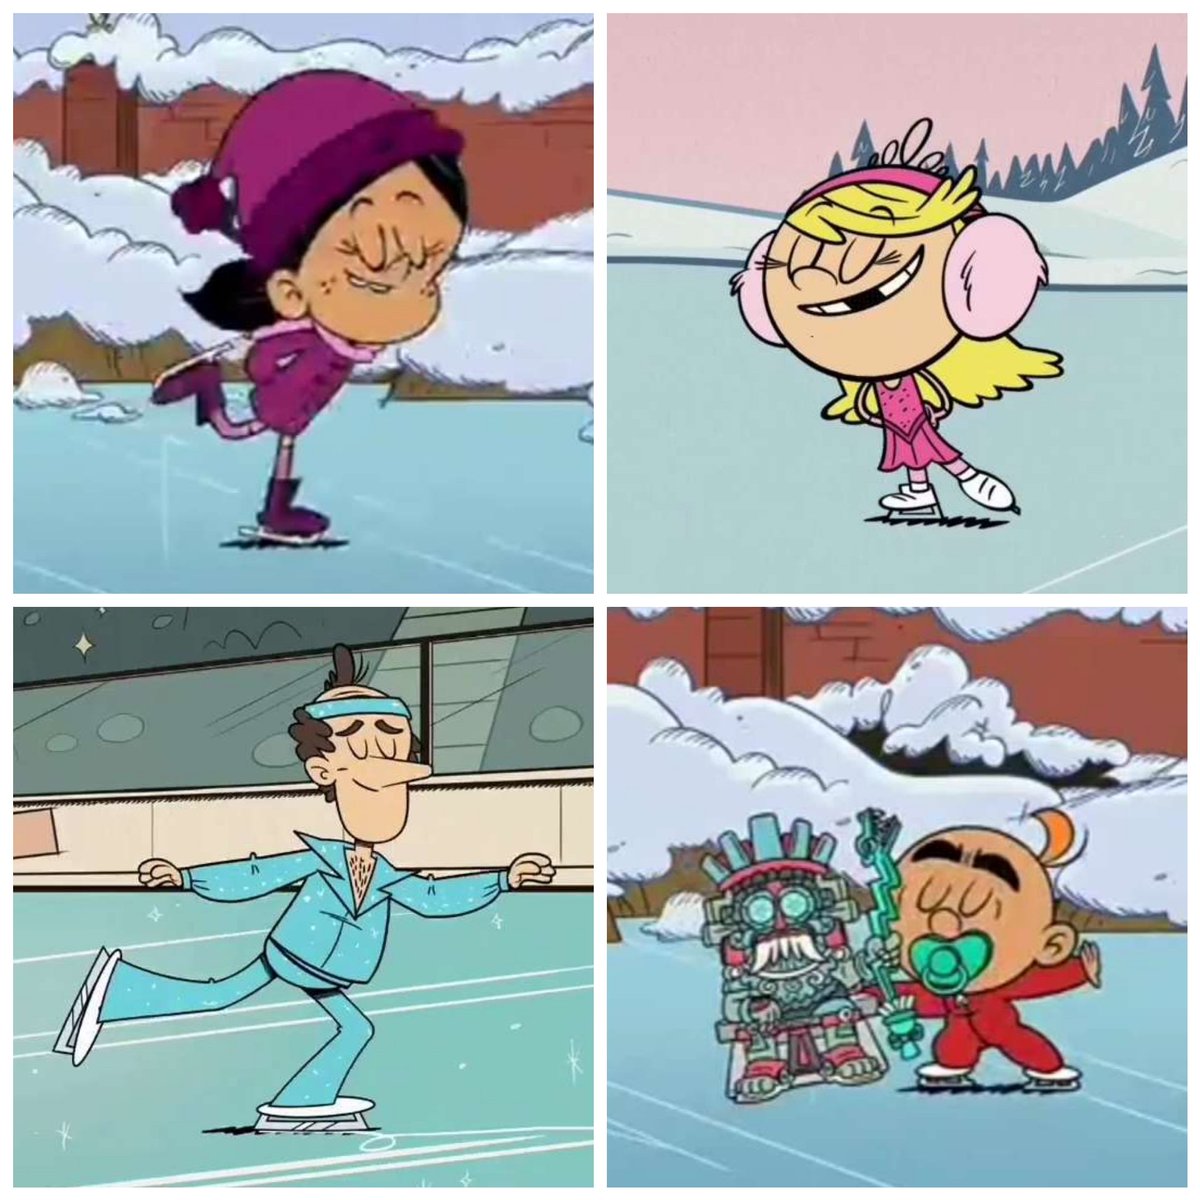 Ice skating
#LynnLoudSr , #LolaLoud , #RonnieAnneSantiago , #CarlitosCasagrande , #TheLoudHouse , #TheCasagrandes , #Nickelodeon